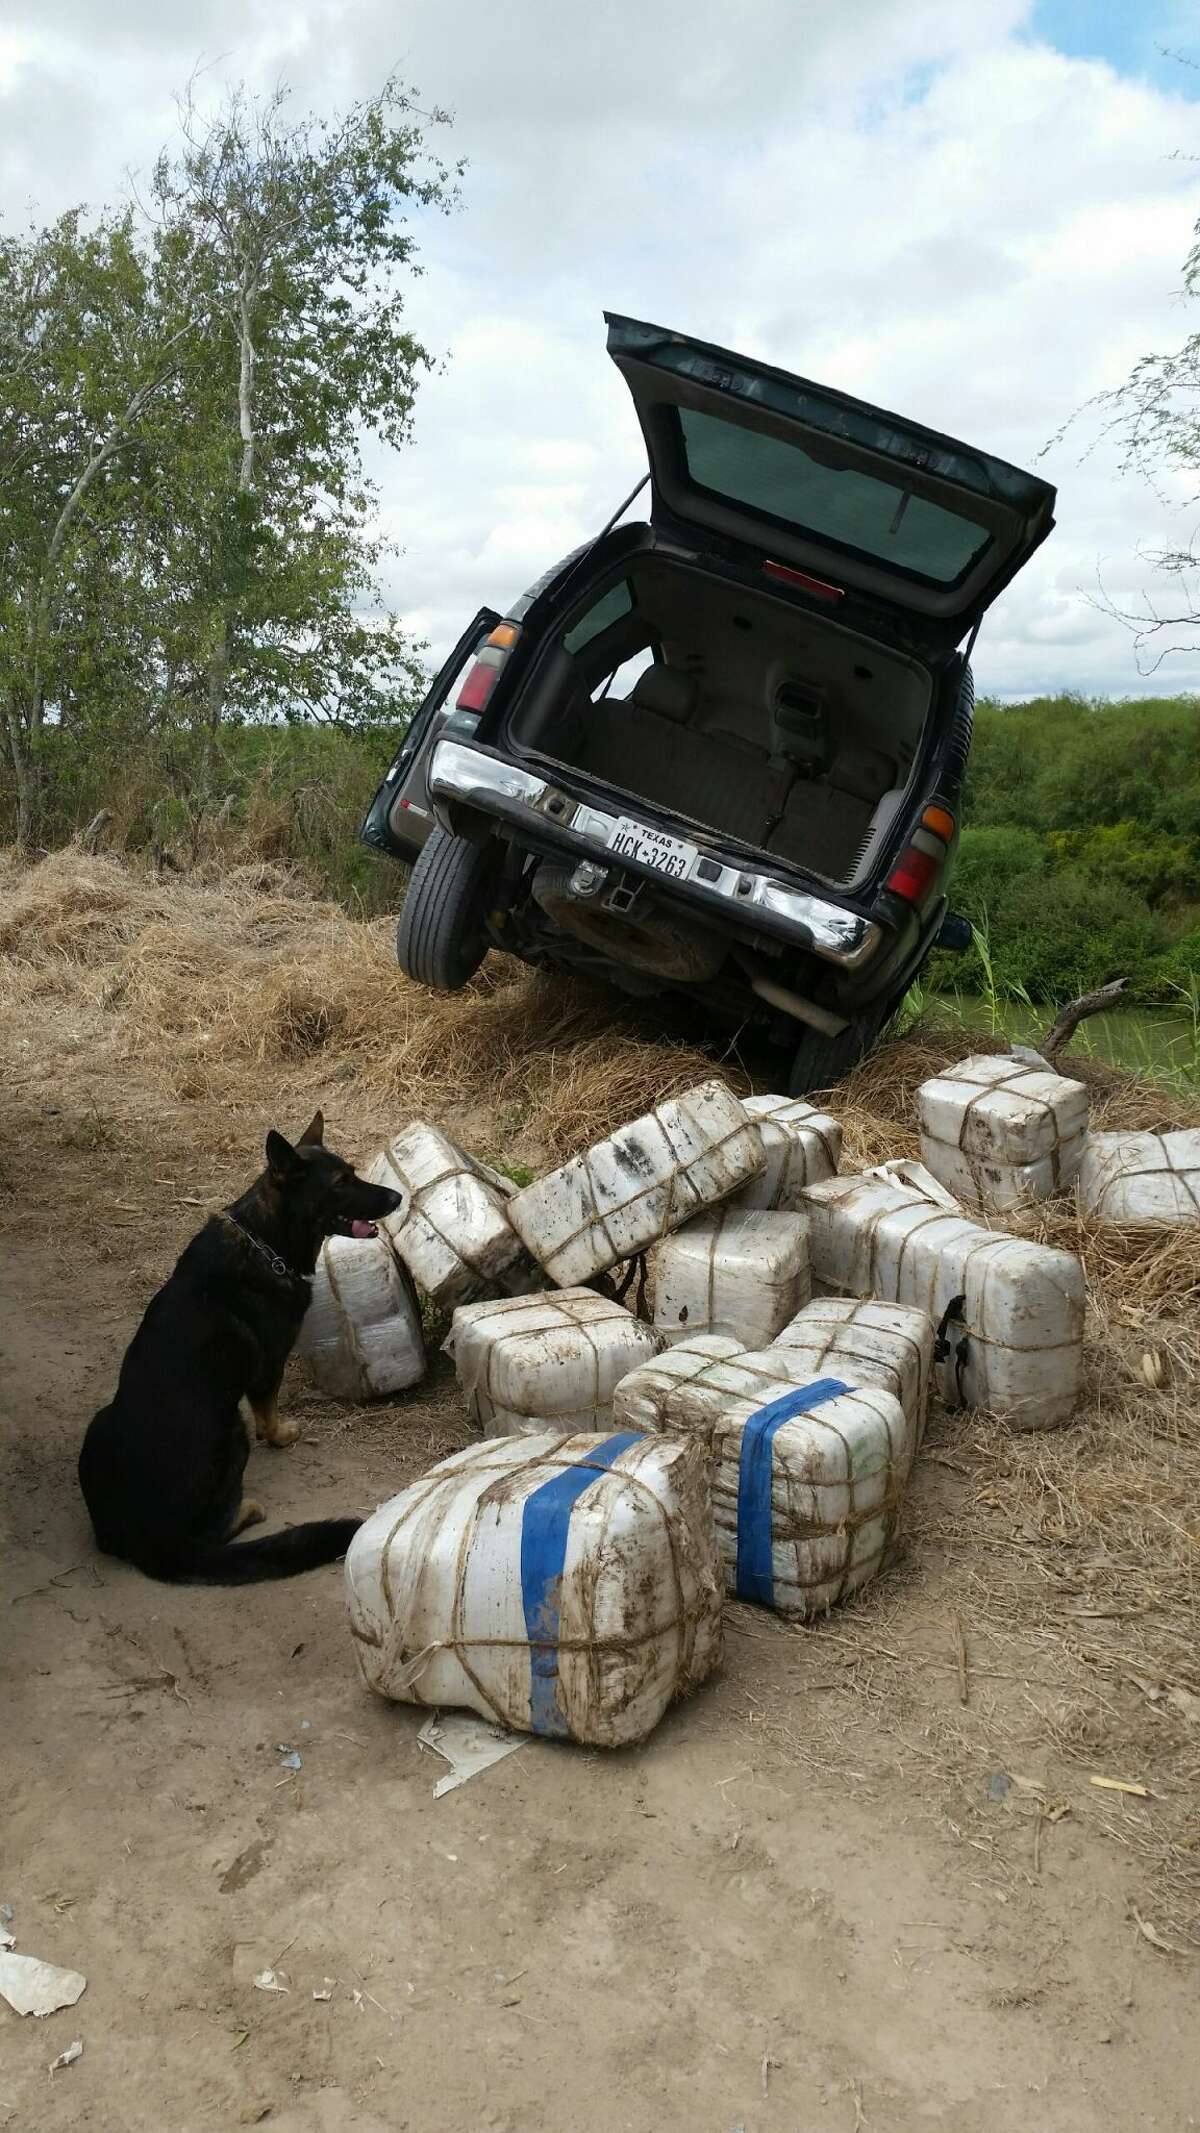 The driver and passengers of this SUV allegedly tried swimming back to Mexico after crashing the drug laden vehicle into the Rio Grande, US Customs Border Protection agents say.